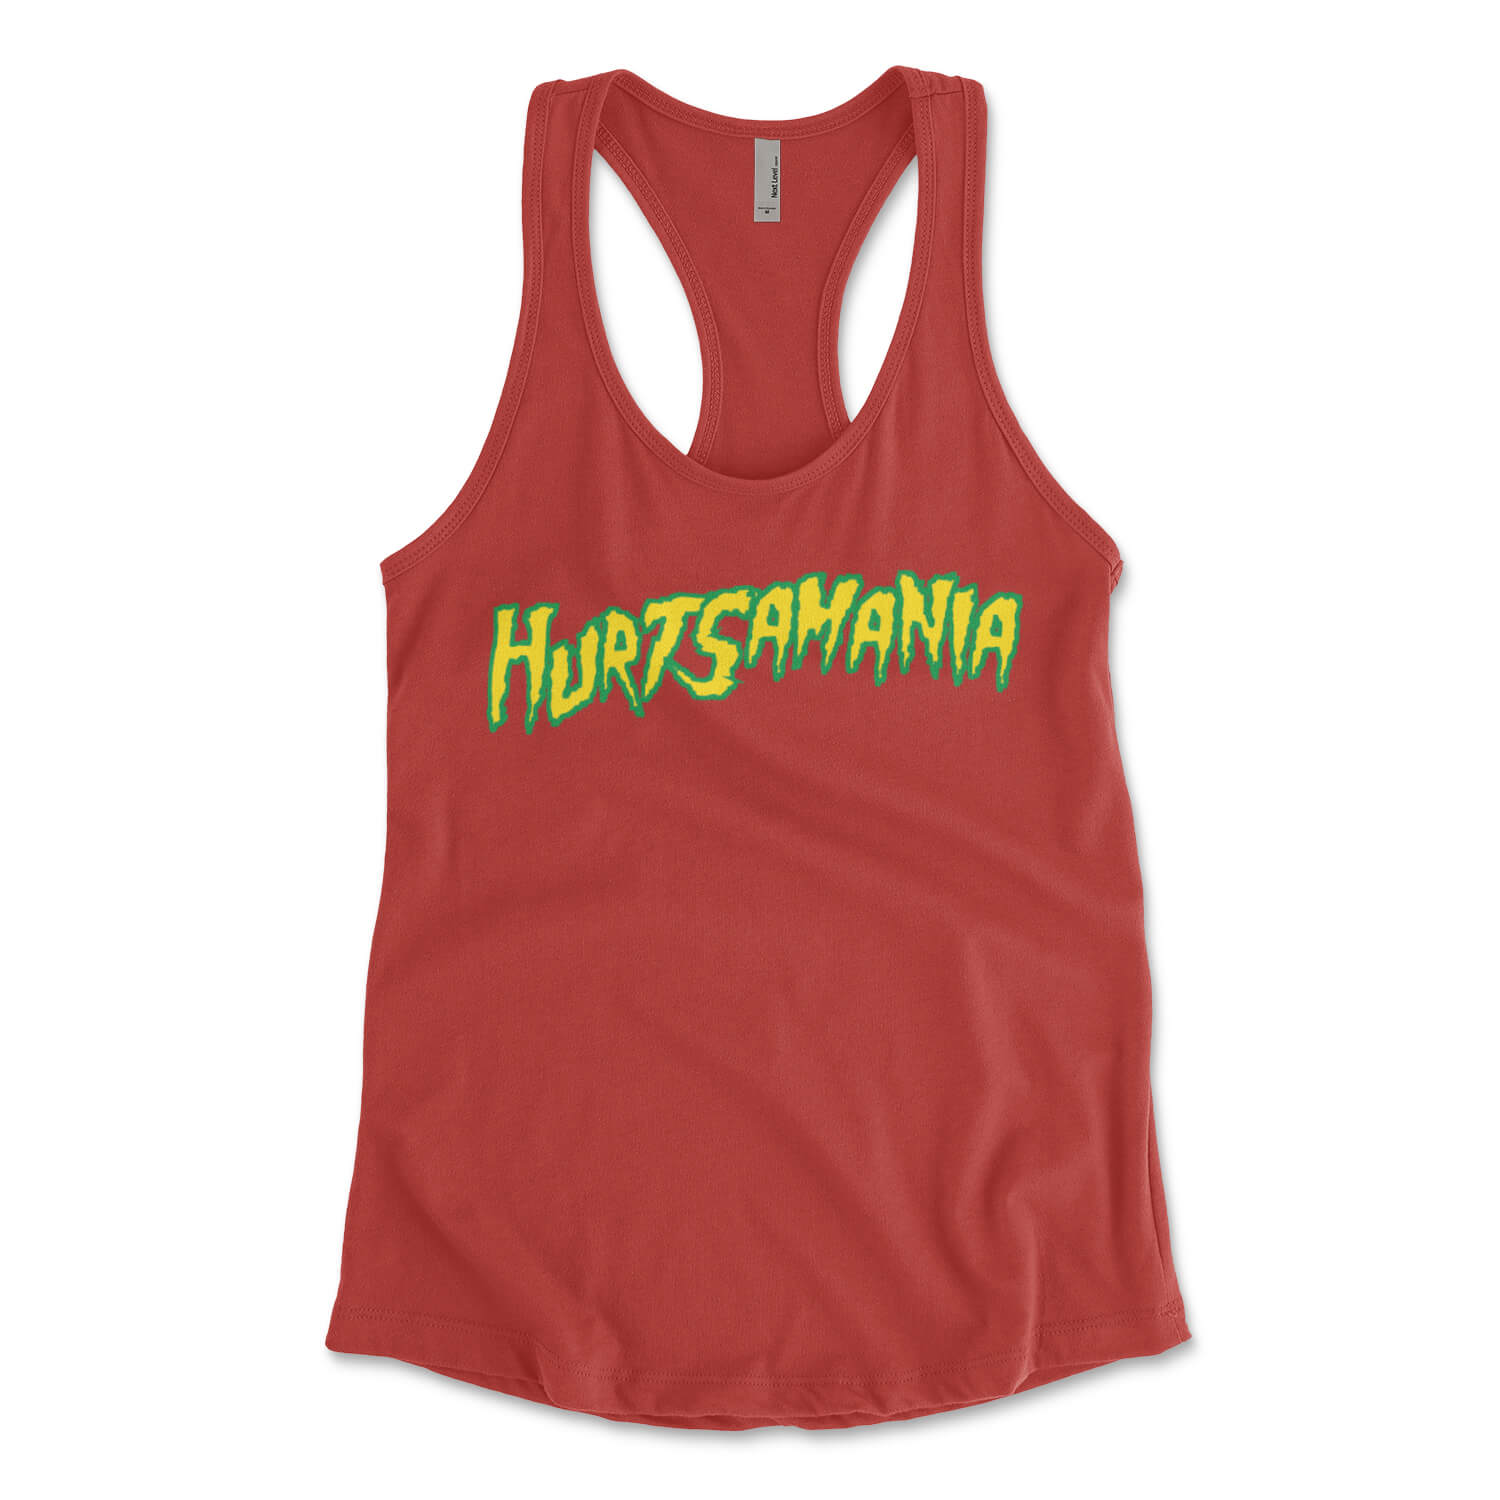 Philadelphia Eagles Jalen Hurts Hurtsamania red womens racerback tank top from Phillygoat